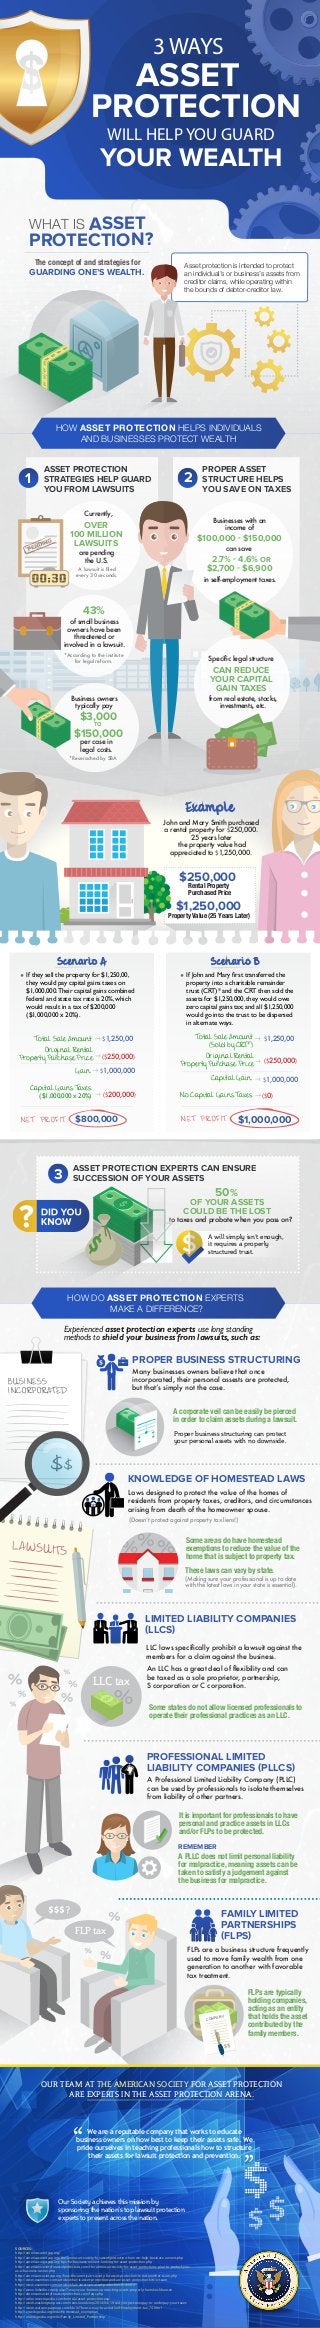 SOURCES:
http://americasocietyap.org/
http://americasocietyap.org/the-american-society-for-asset-protection-how we-help-business-owners.php
http://americasocietyap.org/tips-for-business-owners-looking-for-asset-protection.php
http://americansocietyforassetprotection.com/the-american-society-for-asset-protections-plan-to-protect-you-
as-a-business-owner.php
http://americansocietyap.org/how-the-american-society-for-asset-protection-is-not-another-scam.php
http://www.examiner.com/article/what-is-asset-protection-and-are-asset-protection-kits-a-scam
http://www.examiner.com/article/what-american-asset-protection-firms-do
http://www.linkedin.com/pulse/7-ways-your-business-protecting-assets-properly-hans-kirchhausen
http://americansocietyforassetprotection.com/faqs.php
http://www.investopedia.com/terms/a/asset-protection.asp
http://www.washingtonpost.com/news/wonk/wp/2014/04/15/did-you-just-overpay-or-underpay-your-taxes
http://www.watsoncpagroup.com/kb/Is-There-a-way-to-avoid-Self-Employment-tax_74.html
http://en.wikipedia.org/wiki/Homestead_exemption
http://en.wikipedia.org/wiki/Family_Limited_Partnership
FLP tax
LAWSUITS
Rental Property
Purchased Price
$250,000
Property Value (25 Years Later)
$1,250,000
PROTECTION
YOUR WEALTH
ASSET
3 WAYS
WILL HELP YOU GUARD
PROPER ASSET
STRUCTURE HELPS
YOU SAVE ON TAXES
Asset protection is intended to protect
an individual’s or business’s assets from
creditor claims, while operating within
the bounds of debtor-creditor law.
OVER
100 MILLION
LAWSUITS
Currently,
are pending
the U.S.
A lawsuit is ﬁled
every 30 seconds.
Many businesses owners believe that once
incorporated, their personal assests are protected,
but thatʼs simply not the case.
Laws designed to protect the value of the homes of
residents from property taxes, creditors, and circumstances
arising from death of the homeowner spouse.
Some areas do have homestead
exemptions to reduce the value of the
home that is subject to property tax.
These laws can vary by state.
A Professional Limited Liability Company (PLLC)
can be used by professionals to isolate themselves
from liability of other partners.
It is important for professionals to have
personal and practice assets in LLCs
and/or FLPs to be protected.
LLC laws speciﬁcally prohibit a lawsuit against the
members for a claim against the business.
An LLC has a great deal of ﬂexibility and can
be taxed as a sole proprietor, partnership,
S corporation or C corporation.
Some states do not allow licensed professionals to
operate their professional practices as an LLC.
KNOWLEDGE OF HOMESTEAD LAWS
PROFESSIONAL LIMITED
LIABILITY COMPANIES (PLLCS)
FLPs are a business structure frequently
used to move family wealth from one
generation to another with favorable
tax treatment.
FLPs are typically
holding companies,
acting as an entity
that holds the asset
contributed by the
family members.
Our Society achieves this mission by
sponsoring the nation’s top lawsuit protection
experts to present across the nation.
FAMILY LIMITED
PARTNERSHIPS
(FLPS)
LIMITED LIABILITY COMPANIES
(LLCS)
A corporate veil can be easily be pierced
in order to claim assets during a lawsuit.
Proper business structuring can protect
your personal assets with no downside.
(Doesnʼt protect against property tax liens!)
(Making sure your professional is up to date
with the latest laws in your state is essential).
A PLLC does not limit personal liability
for malpractice, meaning assets can be
taken to satisfy a judgement against
the business for malpractice.
Businesses with an
income of
in self-employment taxes.
2.7% - 4.6% OR
$2,700 - $6,900
can save
$100,000 - $150,000
Speciﬁc legal structure
CAN REDUCE
YOUR CAPITAL
GAIN TAXES
from real estate, stocks,
investments, etc.
John and Mary Smith purchased
a rental property for $250,000.
25 years later
the property value had
appreciated to $1,250,000.
Experienced asset protection experts use long standing
methods to shield your business from lawsuits, such as:
If they sell the property for $1,250,00,
they would pay capital gains taxes on
$1,000,000.Their capital gains combined
federal and state tax rate is 20%, which
would result in a tax of $200,000
($1,000,000 x 20%).
Total Sale Amount
OF YOUR ASSETS
COULD BE THE LOST
to taxes and probate when you pass on?
A will simply isn’t enough,
it requires a properly
structured trust.
Gain
NET PROFIT NET PROFIT
BUSINESS
INCORPORATED
Original Rental
Property Purchase Price
Capital Gains Taxes
($1,000,000 x 20%)
$1,250,00
($200,000)
$1,000,000
$800,000
*According to the institute
for legal reform.
of small business
owners have been
threatened or
involved in a lawsuit.
43%
HOW DO ASSET PROTECTION EXPERTS
MAKE A DIFFERENCE?
The concept of and strategies for
GUARDING ONE’S WEALTH.
WHAT IS ASSET
PROTECTION?
ASSET PROTECTION
STRATEGIES HELP GUARD
YOU FROM LAWSUITS
1 2
ASSET PROTECTION EXPERTS CAN ENSURE
SUCCESSION OF YOUR ASSETS
PROPER BUSINESS STRUCTURING
3
If John and Mary first transferred the
property into a charitable remainder
trust (CRT)* and the CRT then sold the
assets for $1,250,000, they would owe
zero capital gains tax; and all $1,250,000
would go into the trust to be dispersed
in alternate ways.
Total Sale Amount
(Sold by CRT*)
Capital Gain
Original Rental
Property Purchase Price
No Capital Gains Taxes
$1,250,00
($250,000)
($250,000)
($0)
$1,000,000
$1,000,000
Scenario BScenario A
OUR TEAM AT THE AMERICAN SOCIETY FOR ASSET PROTECTION
ARE EXPERTS IN THE ASSET PROTECTION ARENA.
*Reserached by SBA
Business owners
typically pay
per case in
legal costs.
$3,000
$150,000
TO
We are a reputable company that works to educate
business owners on how best to keep their assets safe. We
pride ourselves in teaching professionals how to structure
their assets for lawsuit protection and prevention.
HOW ASSET PROTECTION HELPS INDIVIDUALS
AND BUSINESSES PROTECT WEALTH
Example
50%
REMEMBER
LLC tax
COMPANY
 